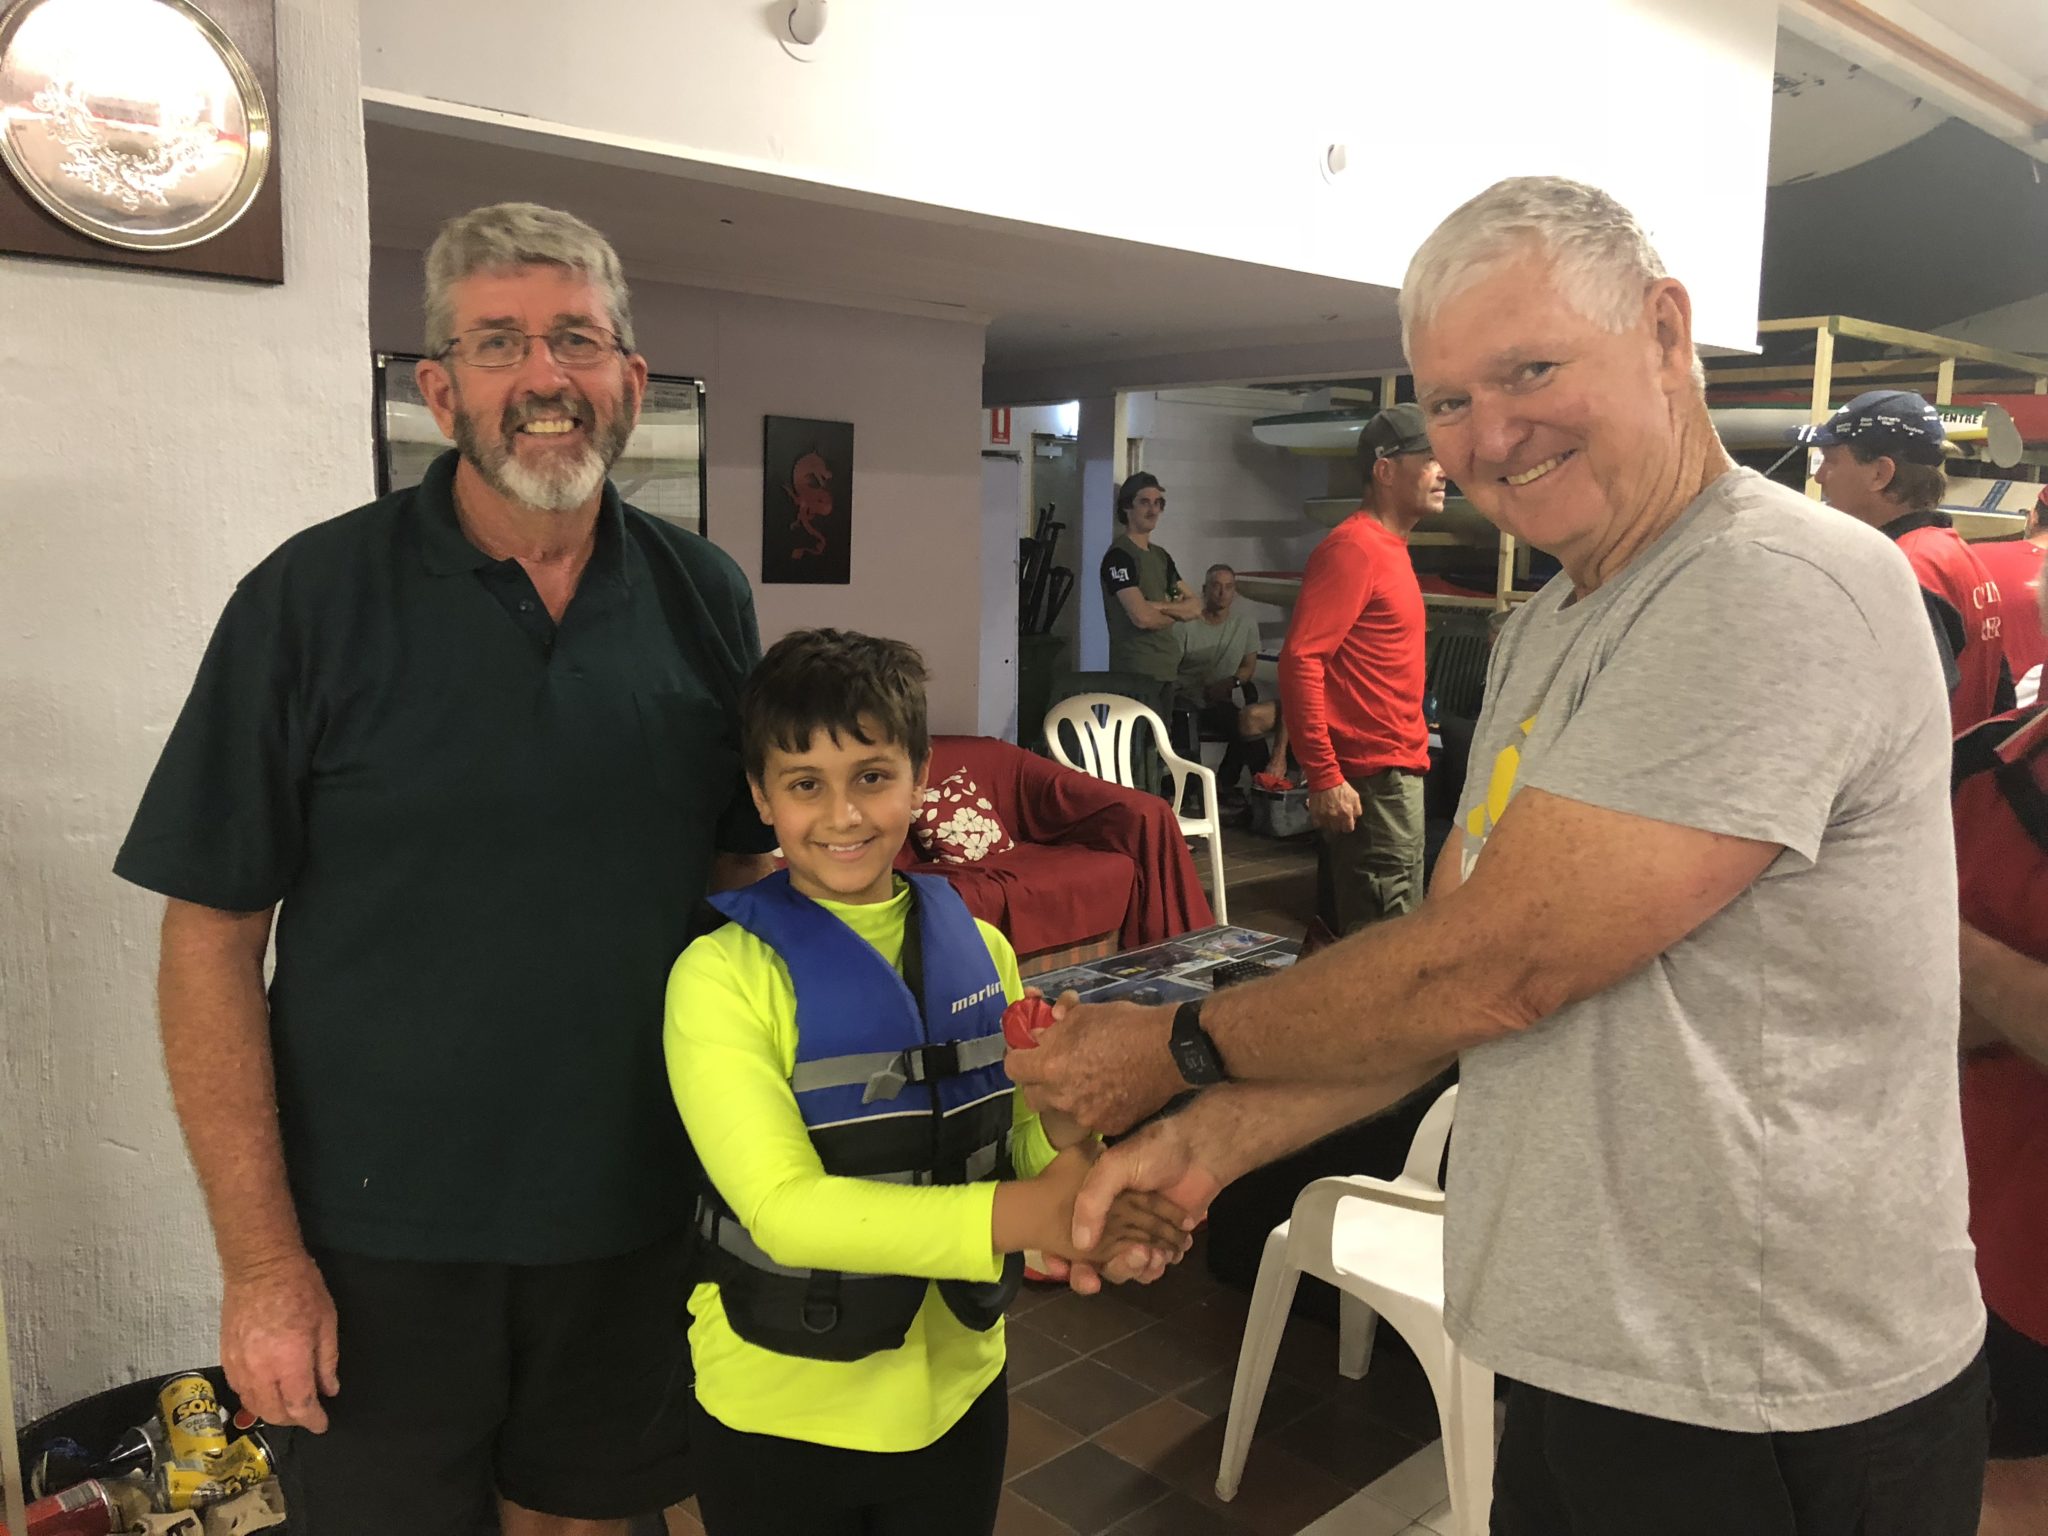 Tues 13th November 2018 : Tonight’s photo shows club member Jerry Alderson presenting David Griffiths with a movie voucher and Connor Jacob with a small junior prize